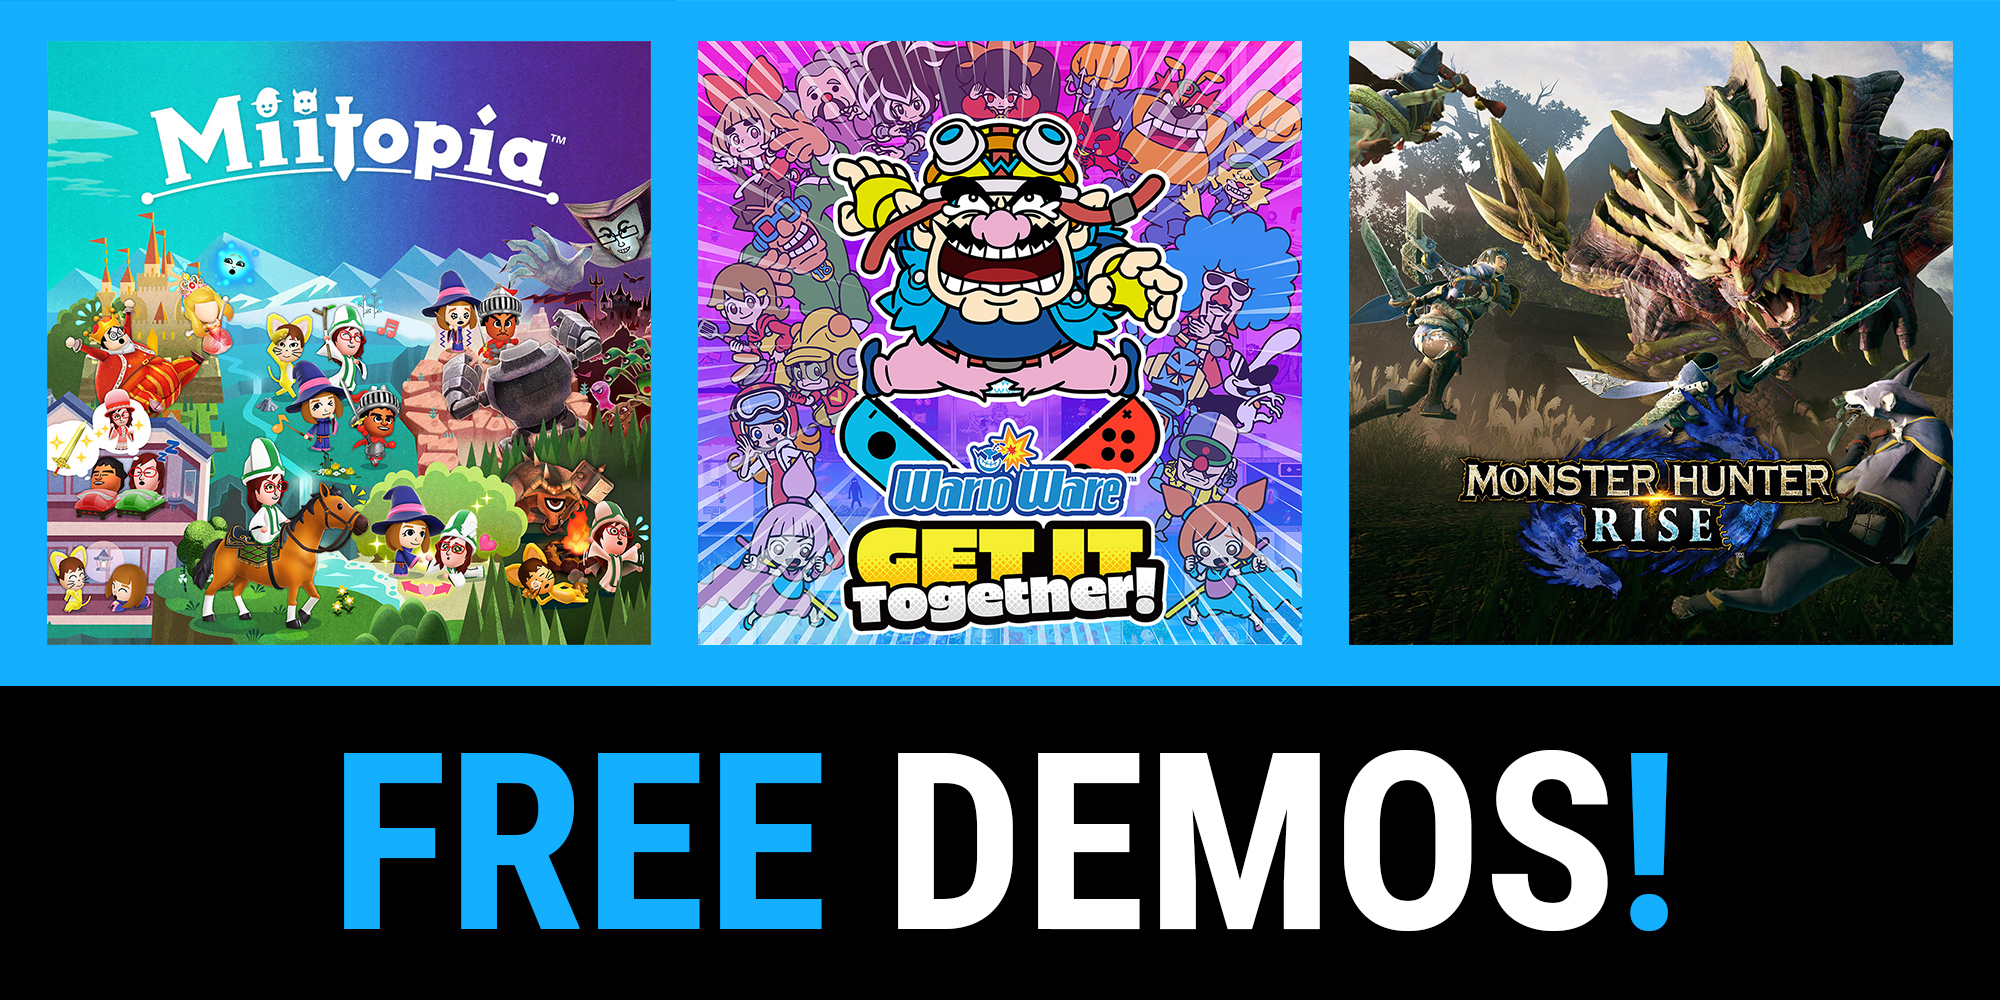 Try these games for free on Nintendo Switch!